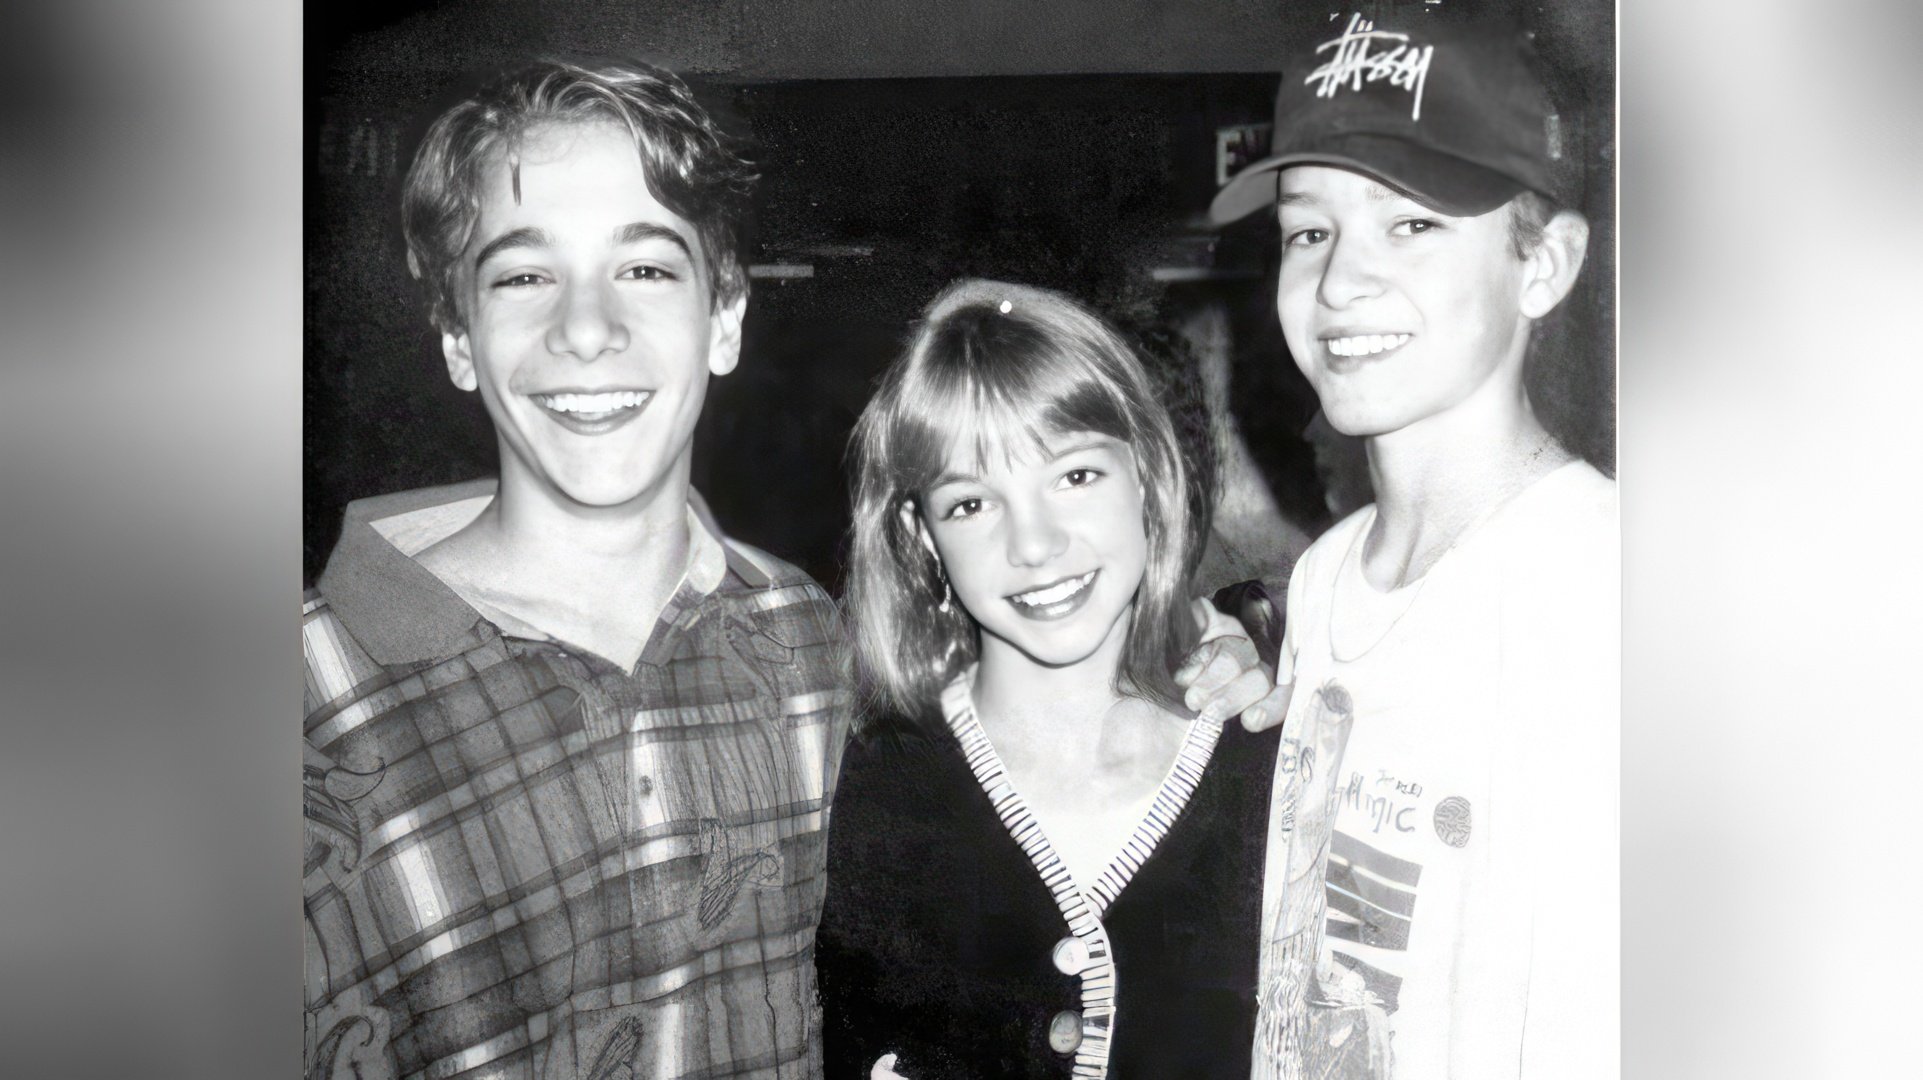 Young Britney Spears with Ryan Gosling (left) and Justin Timberlake